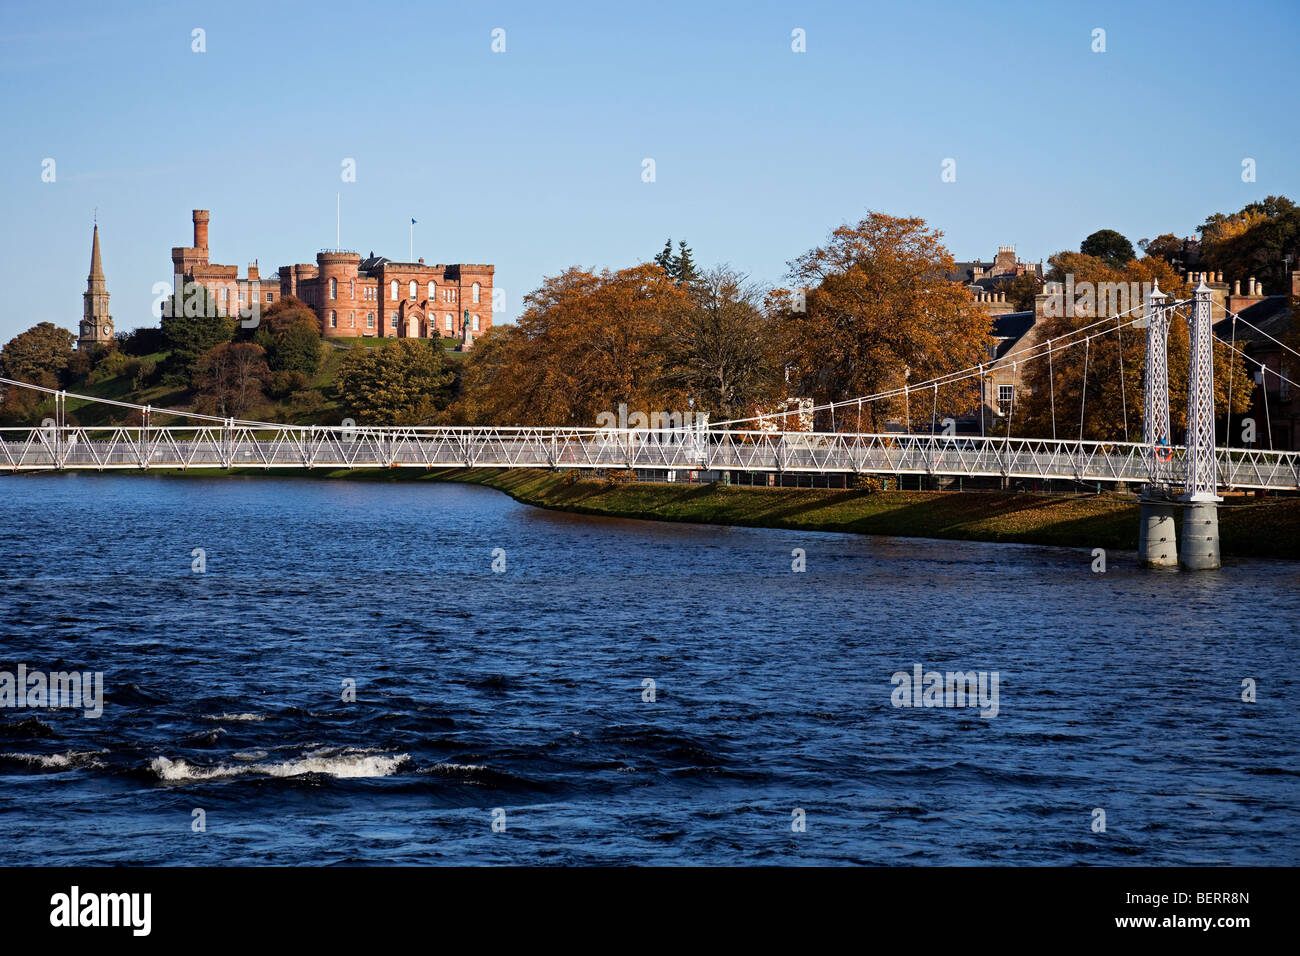 Footbridge spanning the River Ness, with Inverness Castle in background Inverness-shire, Scotland UK Europe Stock Photo